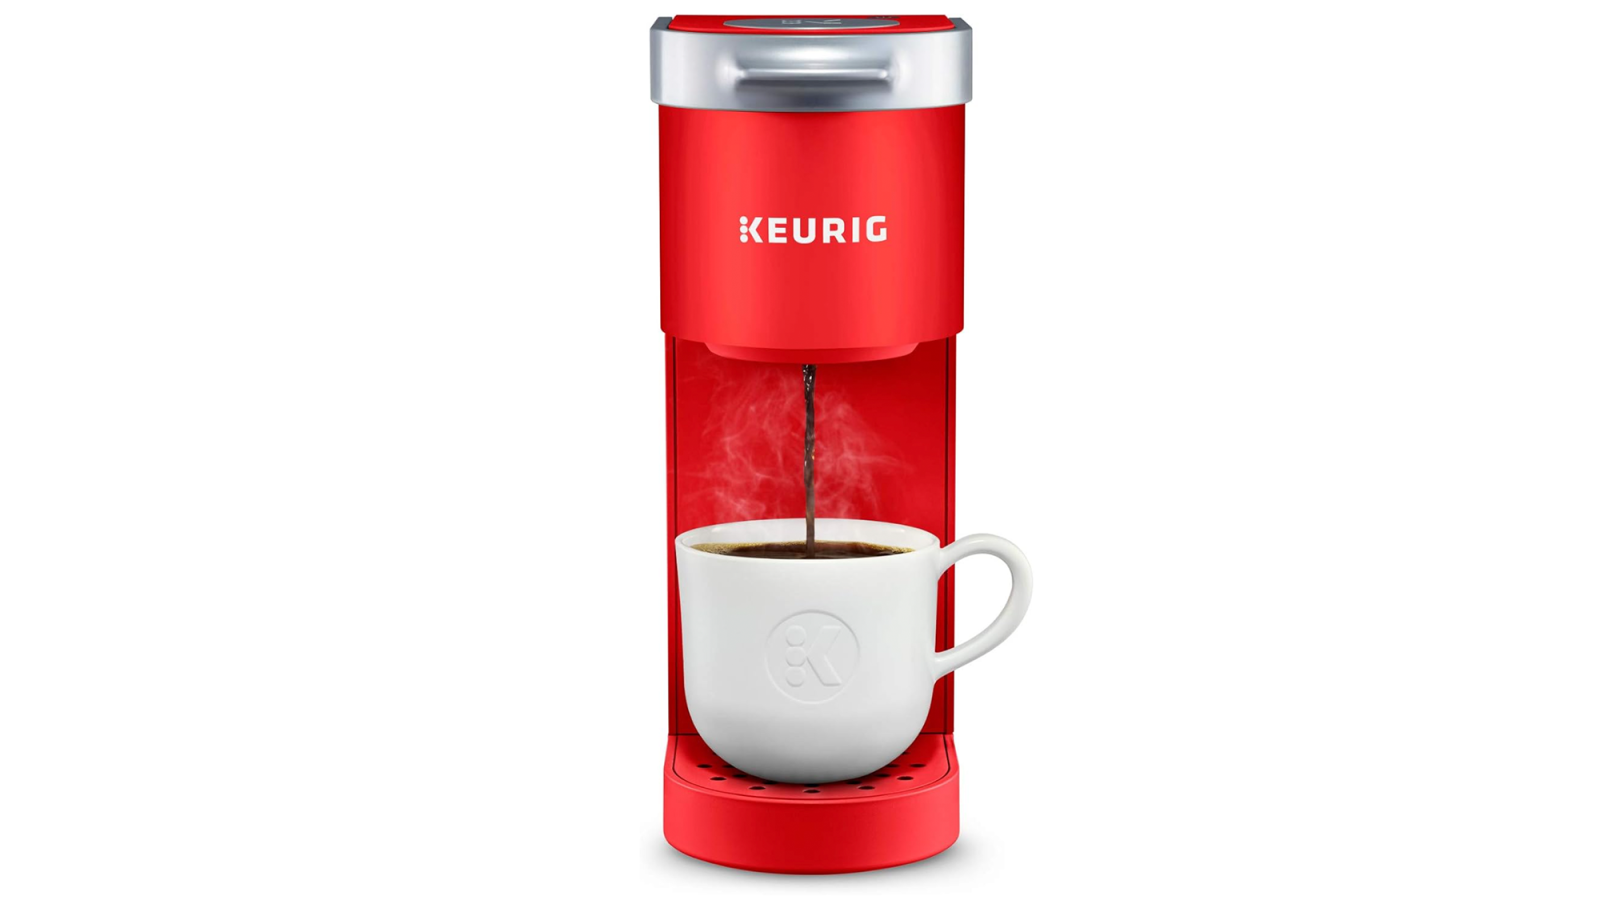 https://www.usmagazine.com/wp-content/uploads/2023/12/Keurig-coffee-makeer.png?crop=0px%2C102px%2C2000px%2C1130px&resize=1600%2C900&quality=86&strip=all